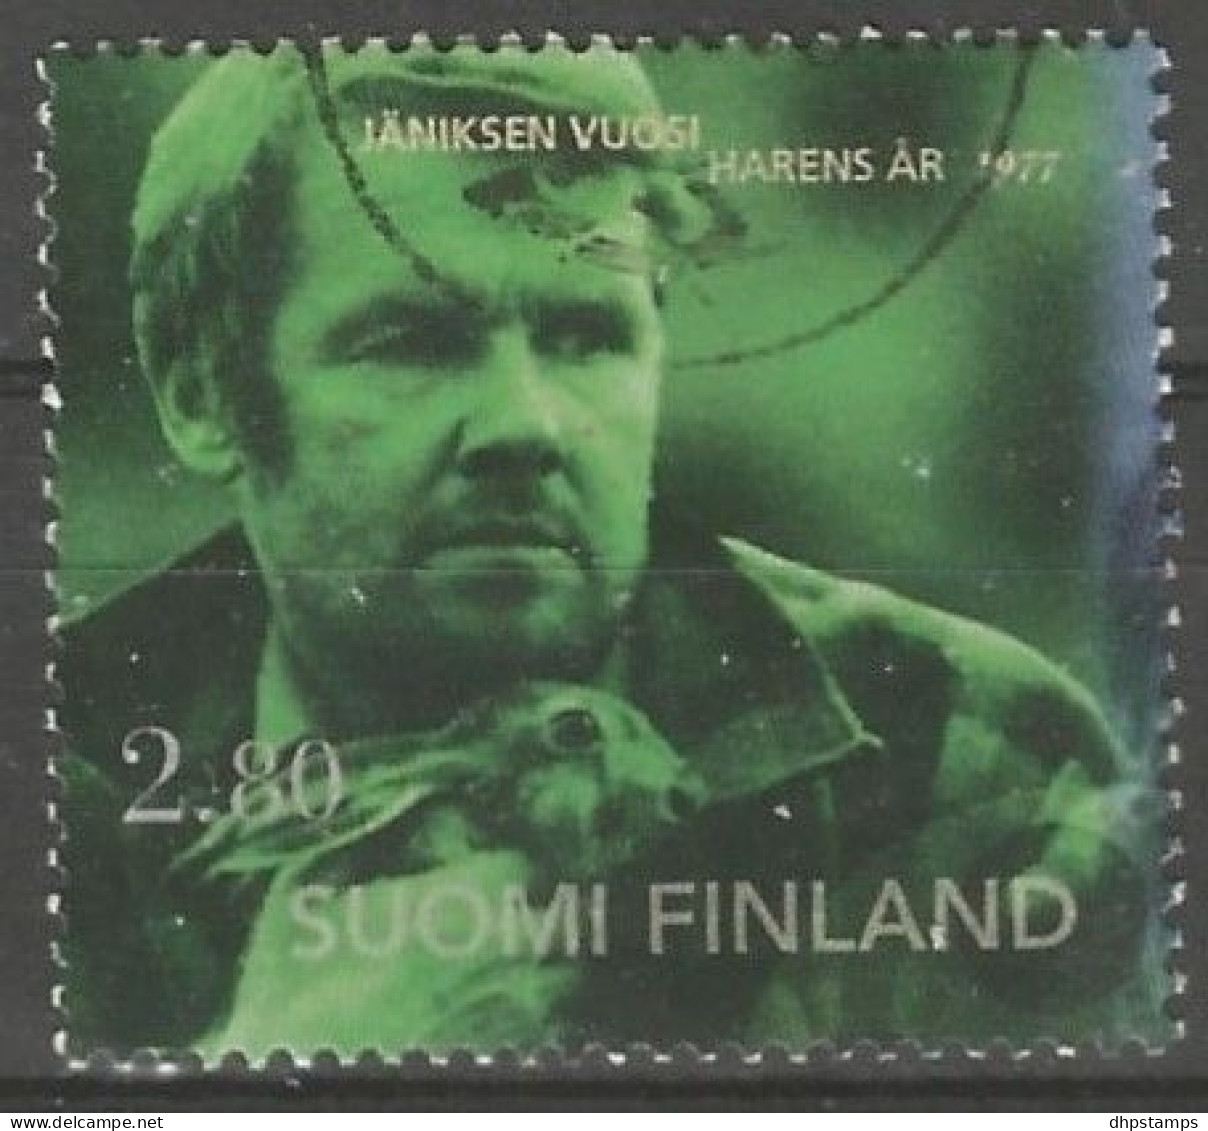 Finland 1996 Film Y.T. 1308 (0) - Used Stamps